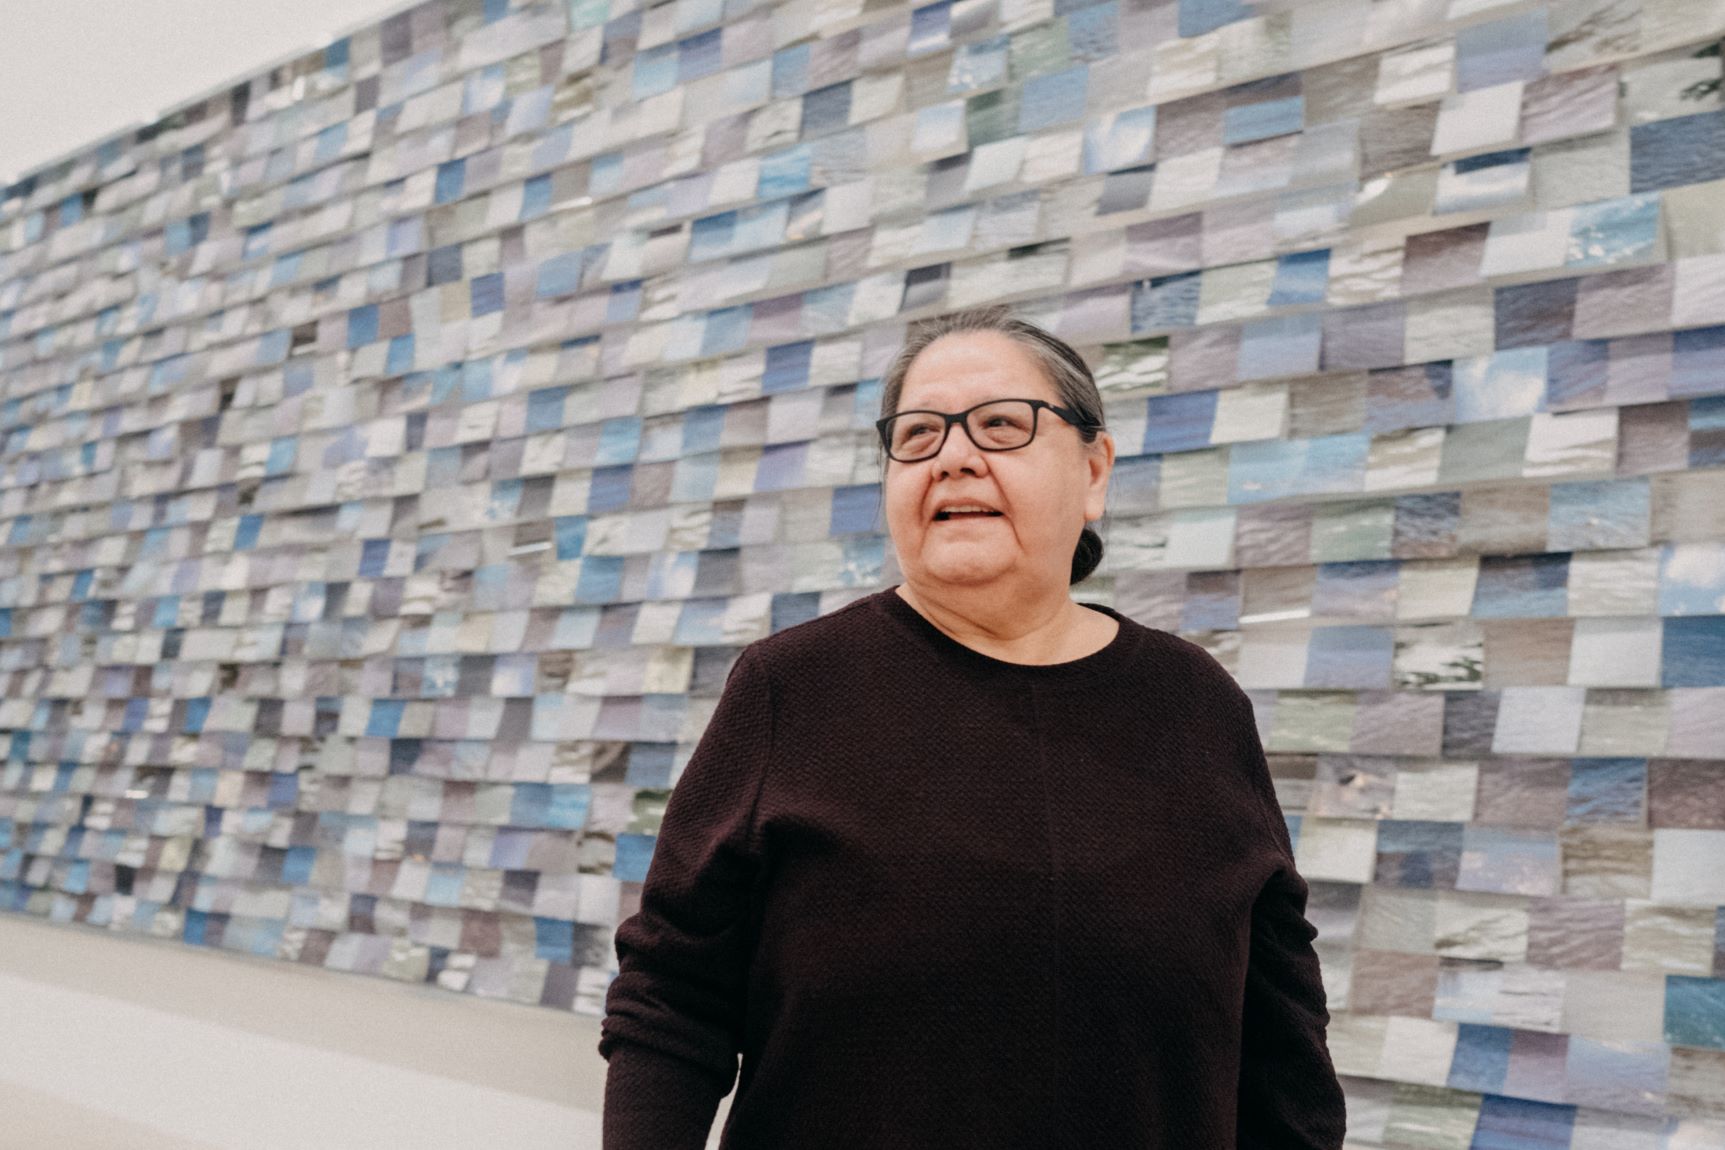 Faye HeavyShield with her commissioned work "aiyo niitahtaan" at the Pulitzer Arts Foundation